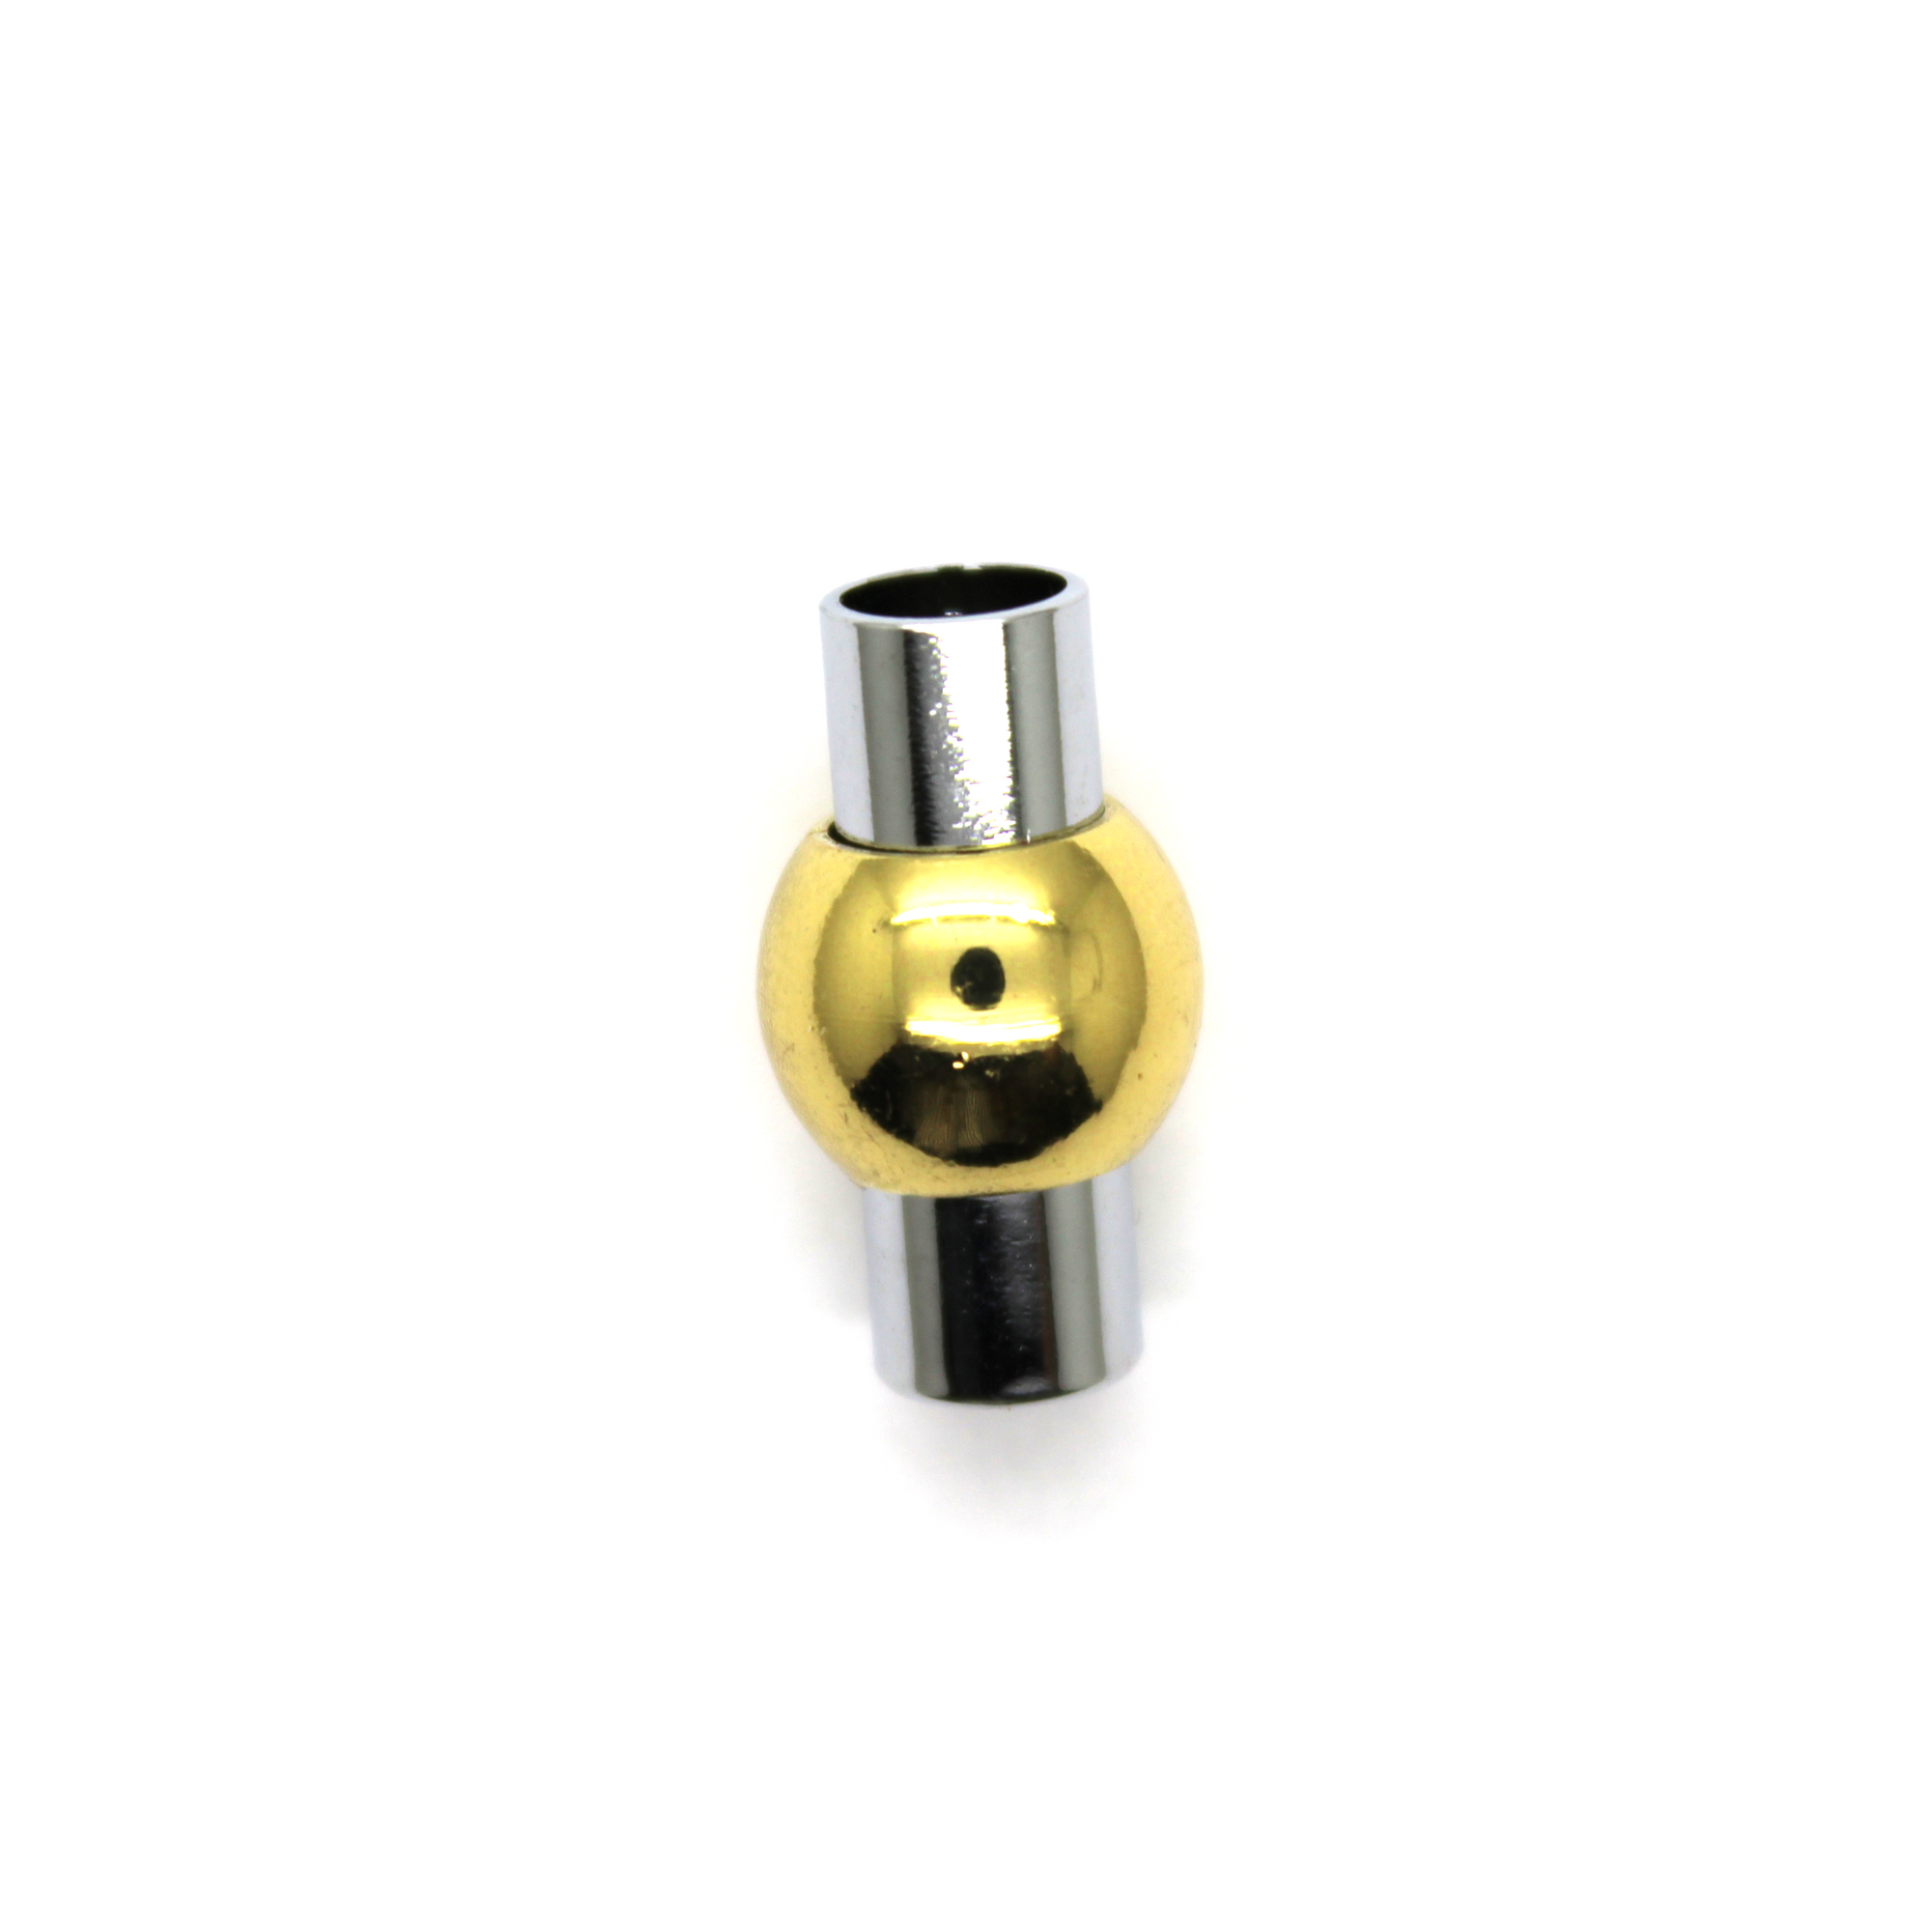 Clasp, Ball Barrel Magnetic Clasp, Alloy, Silver and Gold, 19mm x 10mm, Sold Per pkg of 1